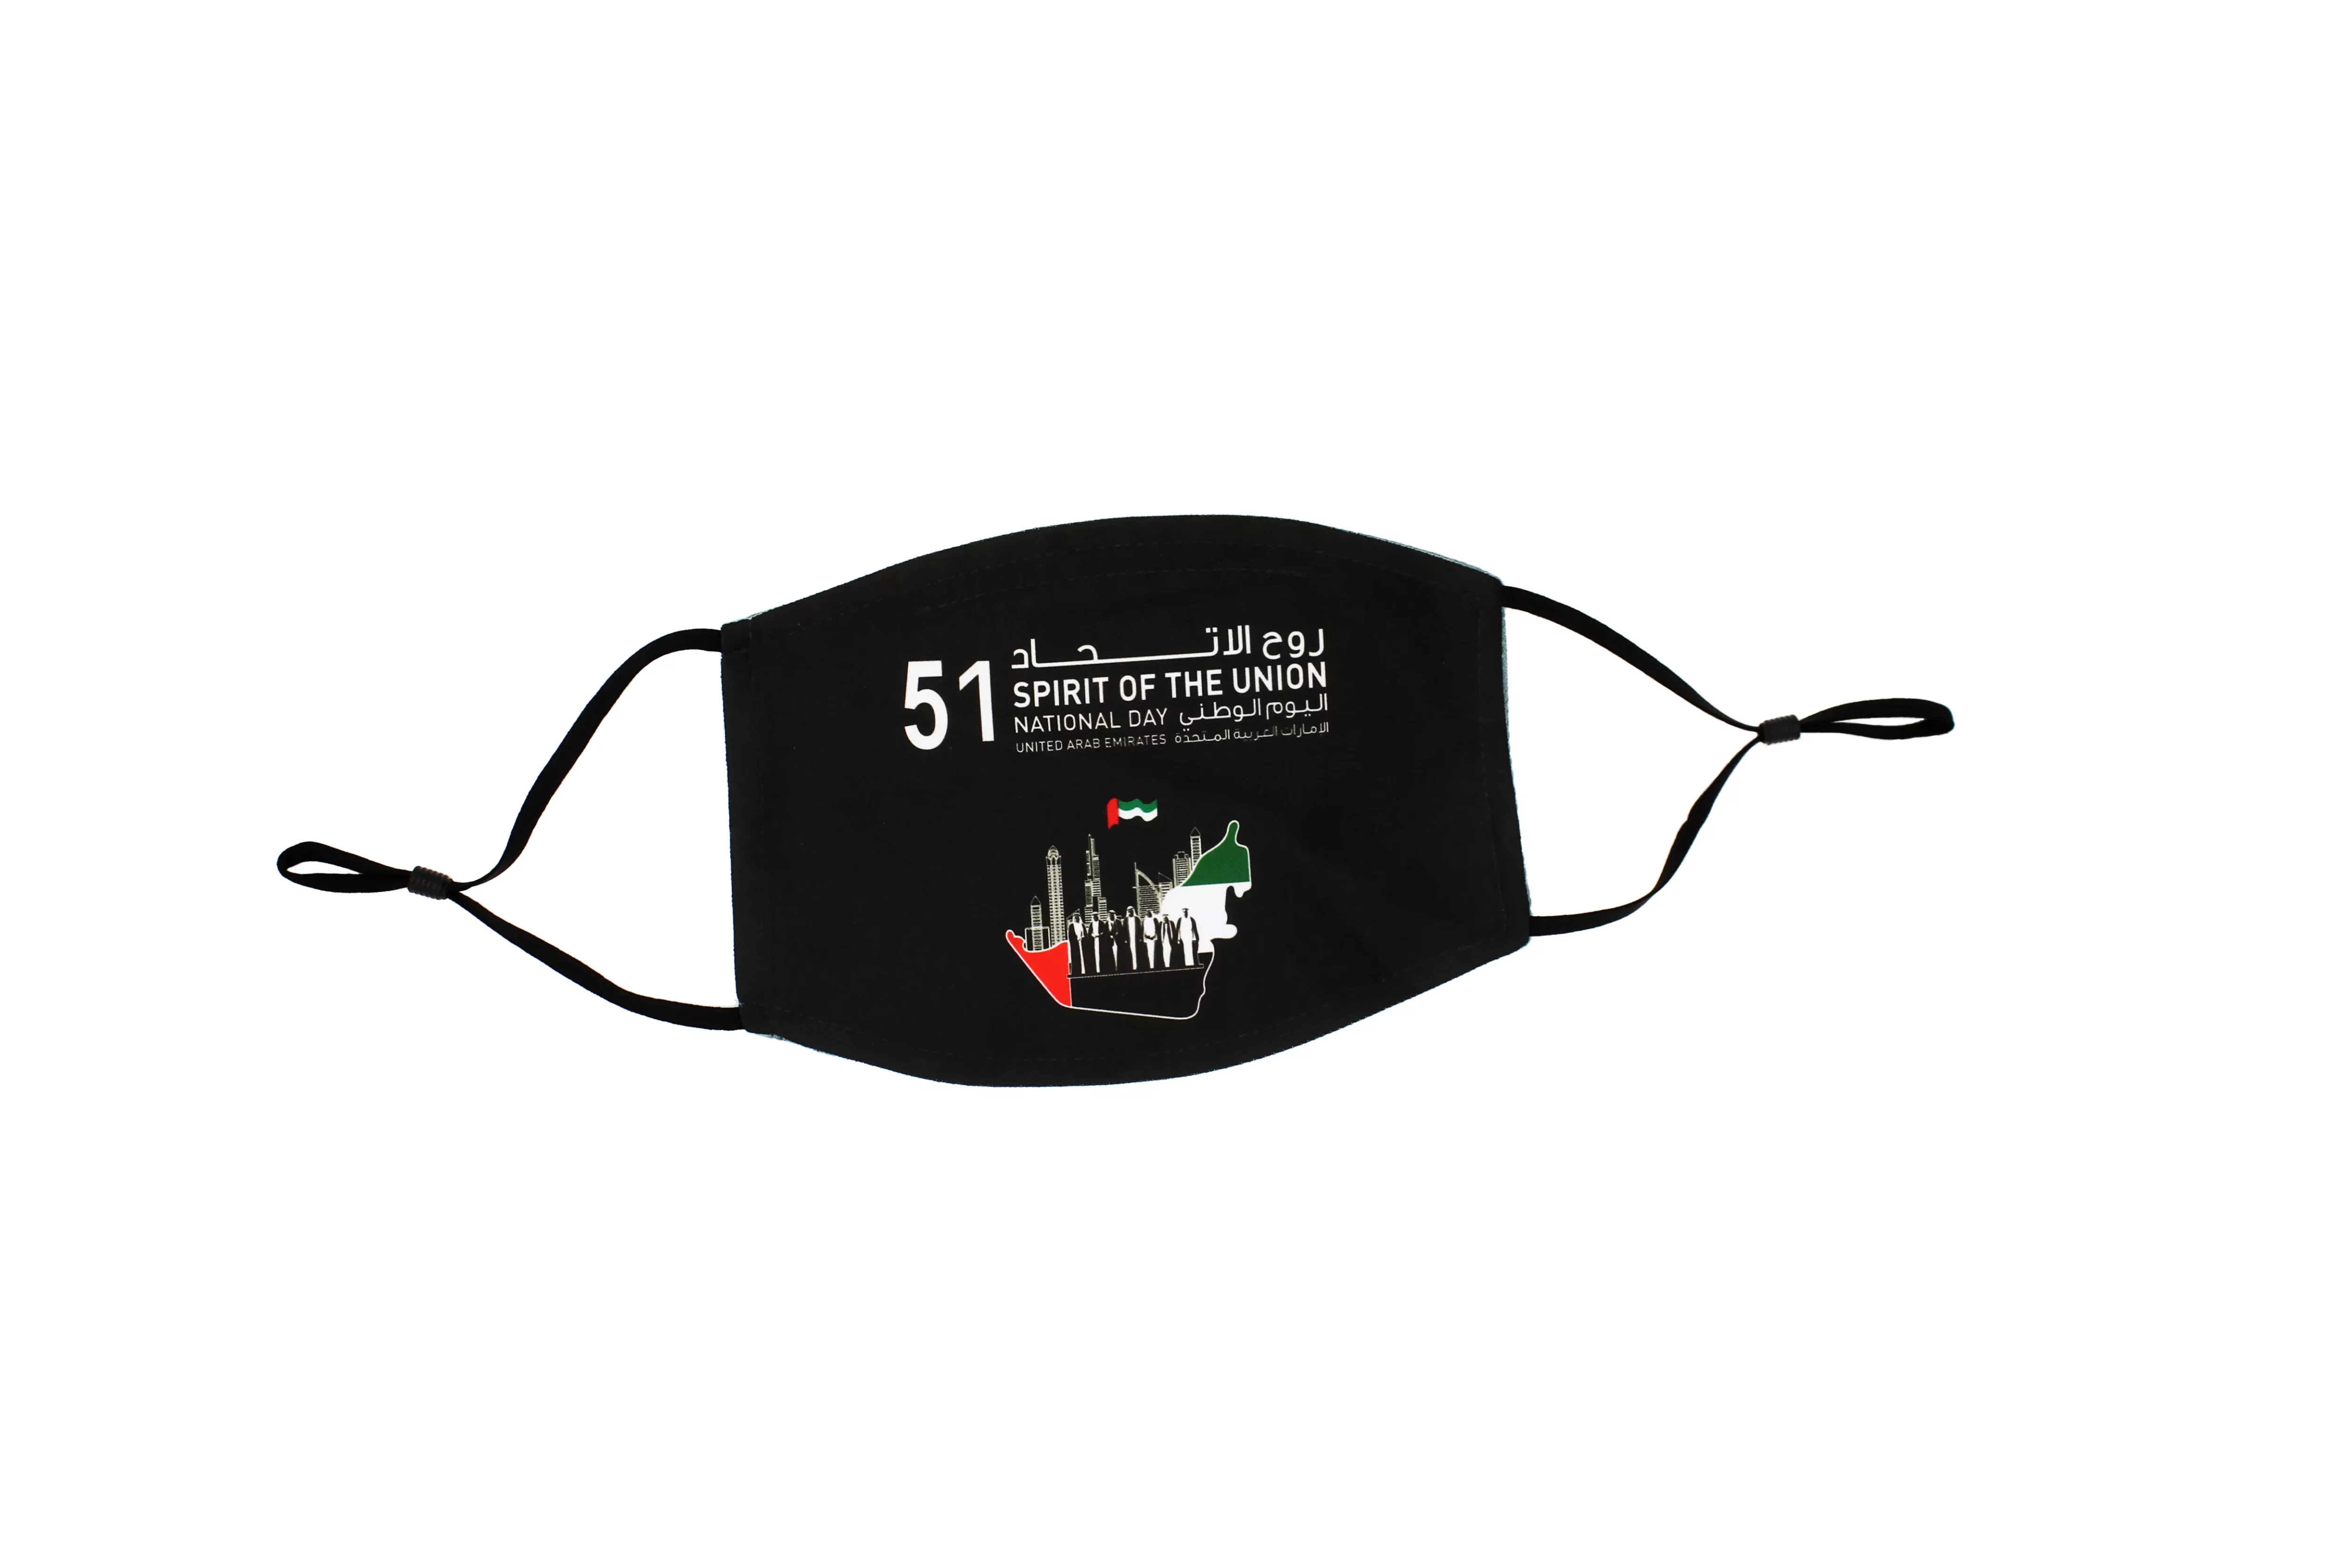 UAE National Day Facemask